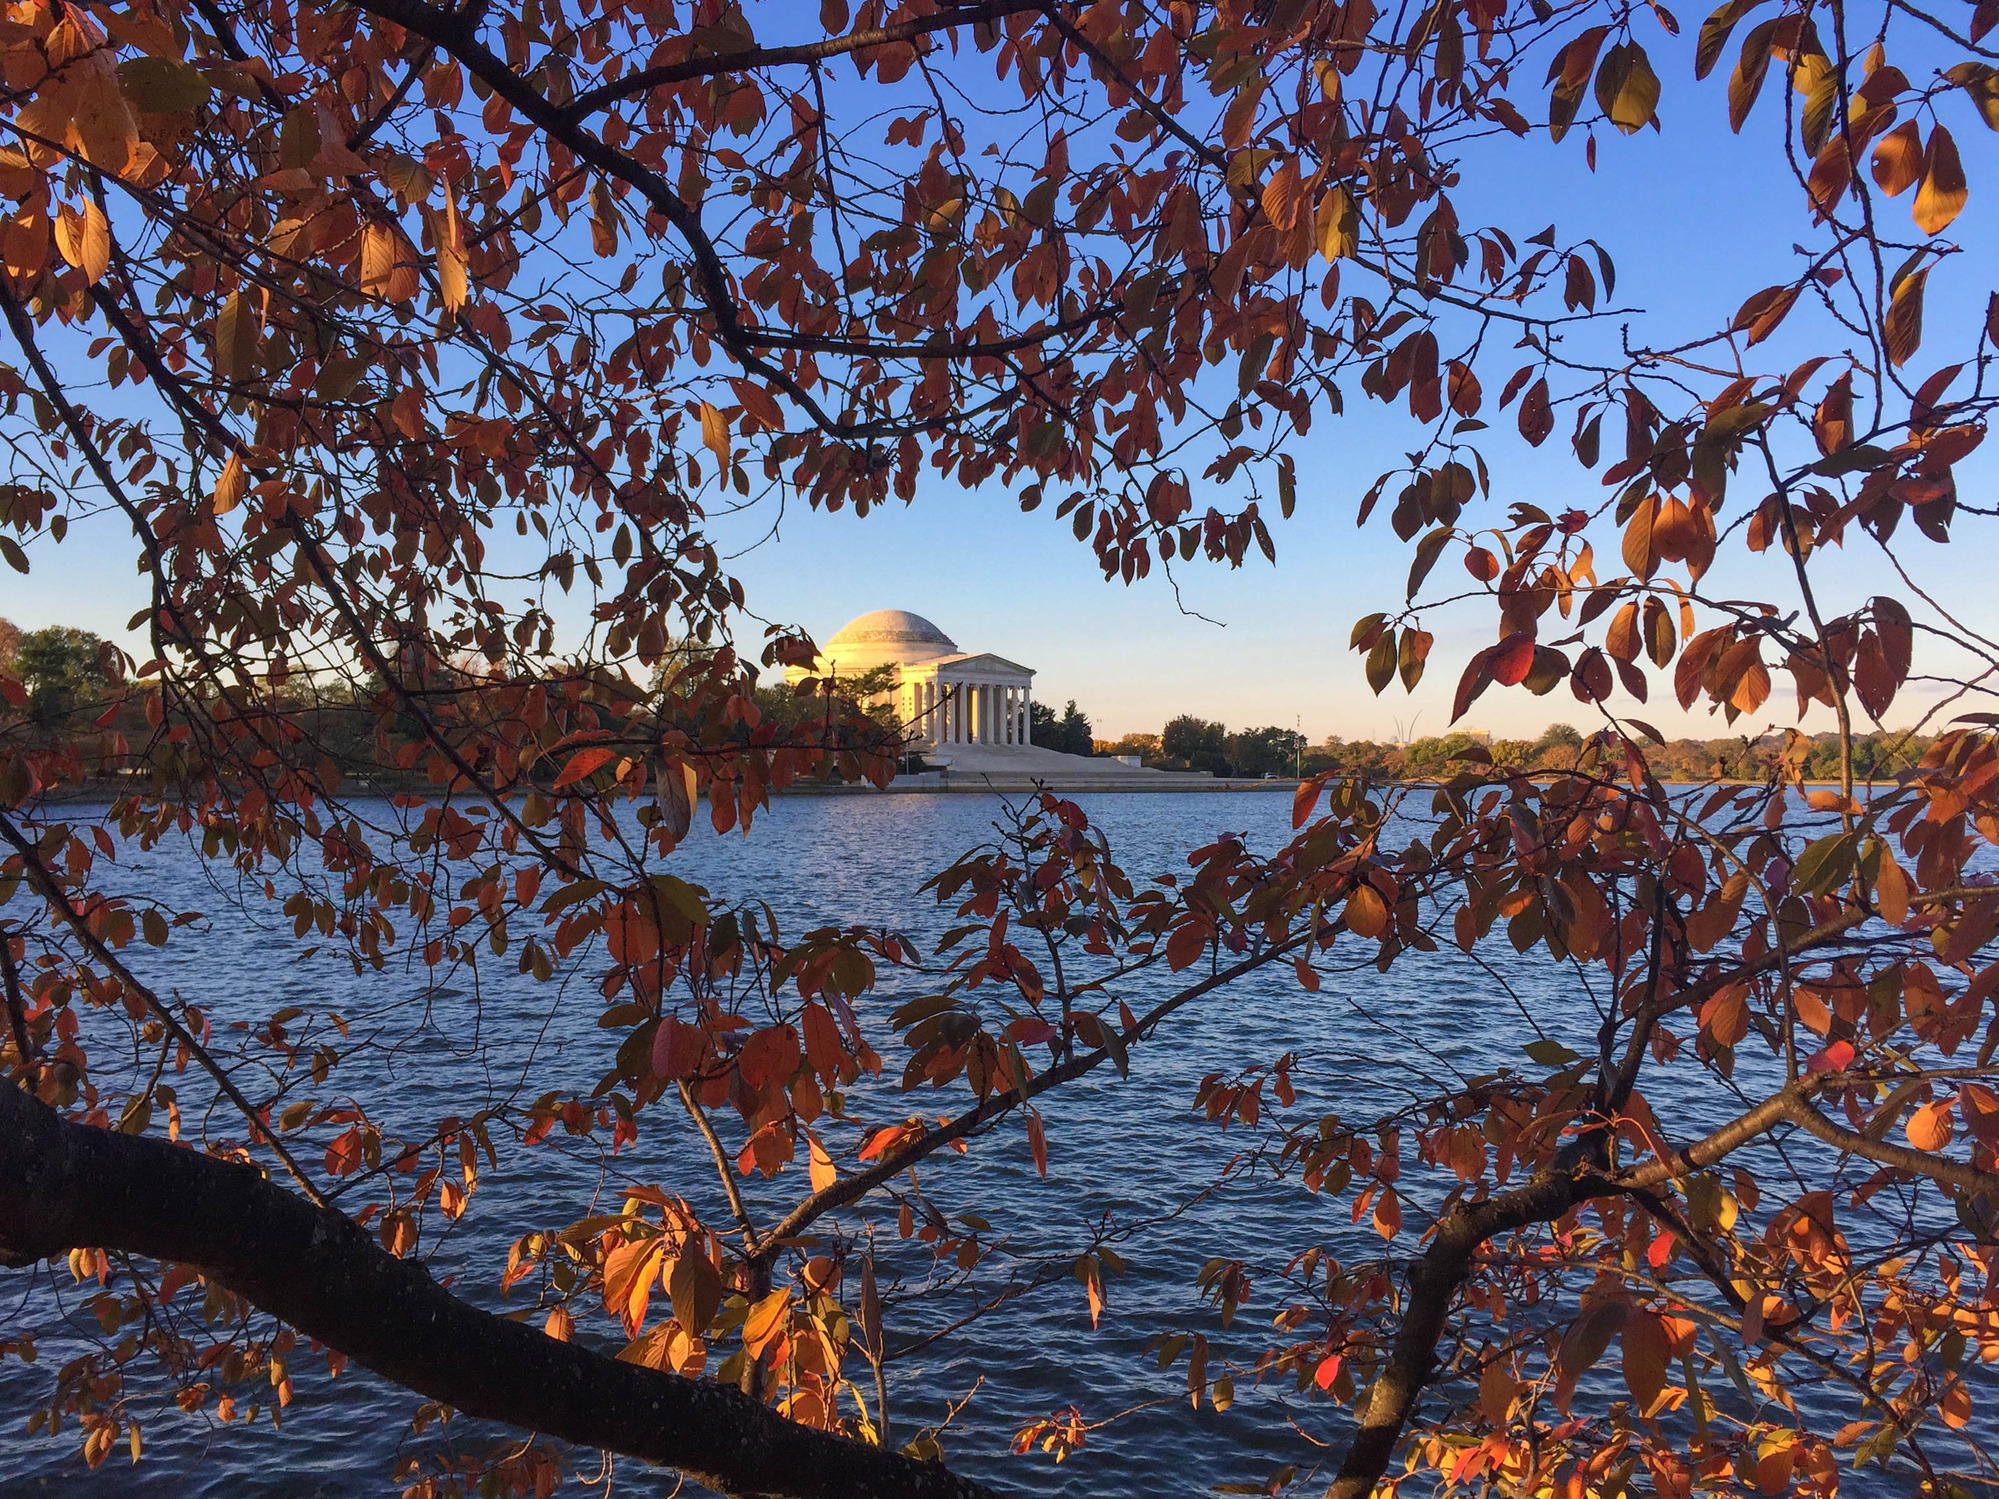 Thomas Jefferson Memorial across the Tidal Basin through red leaves on branches